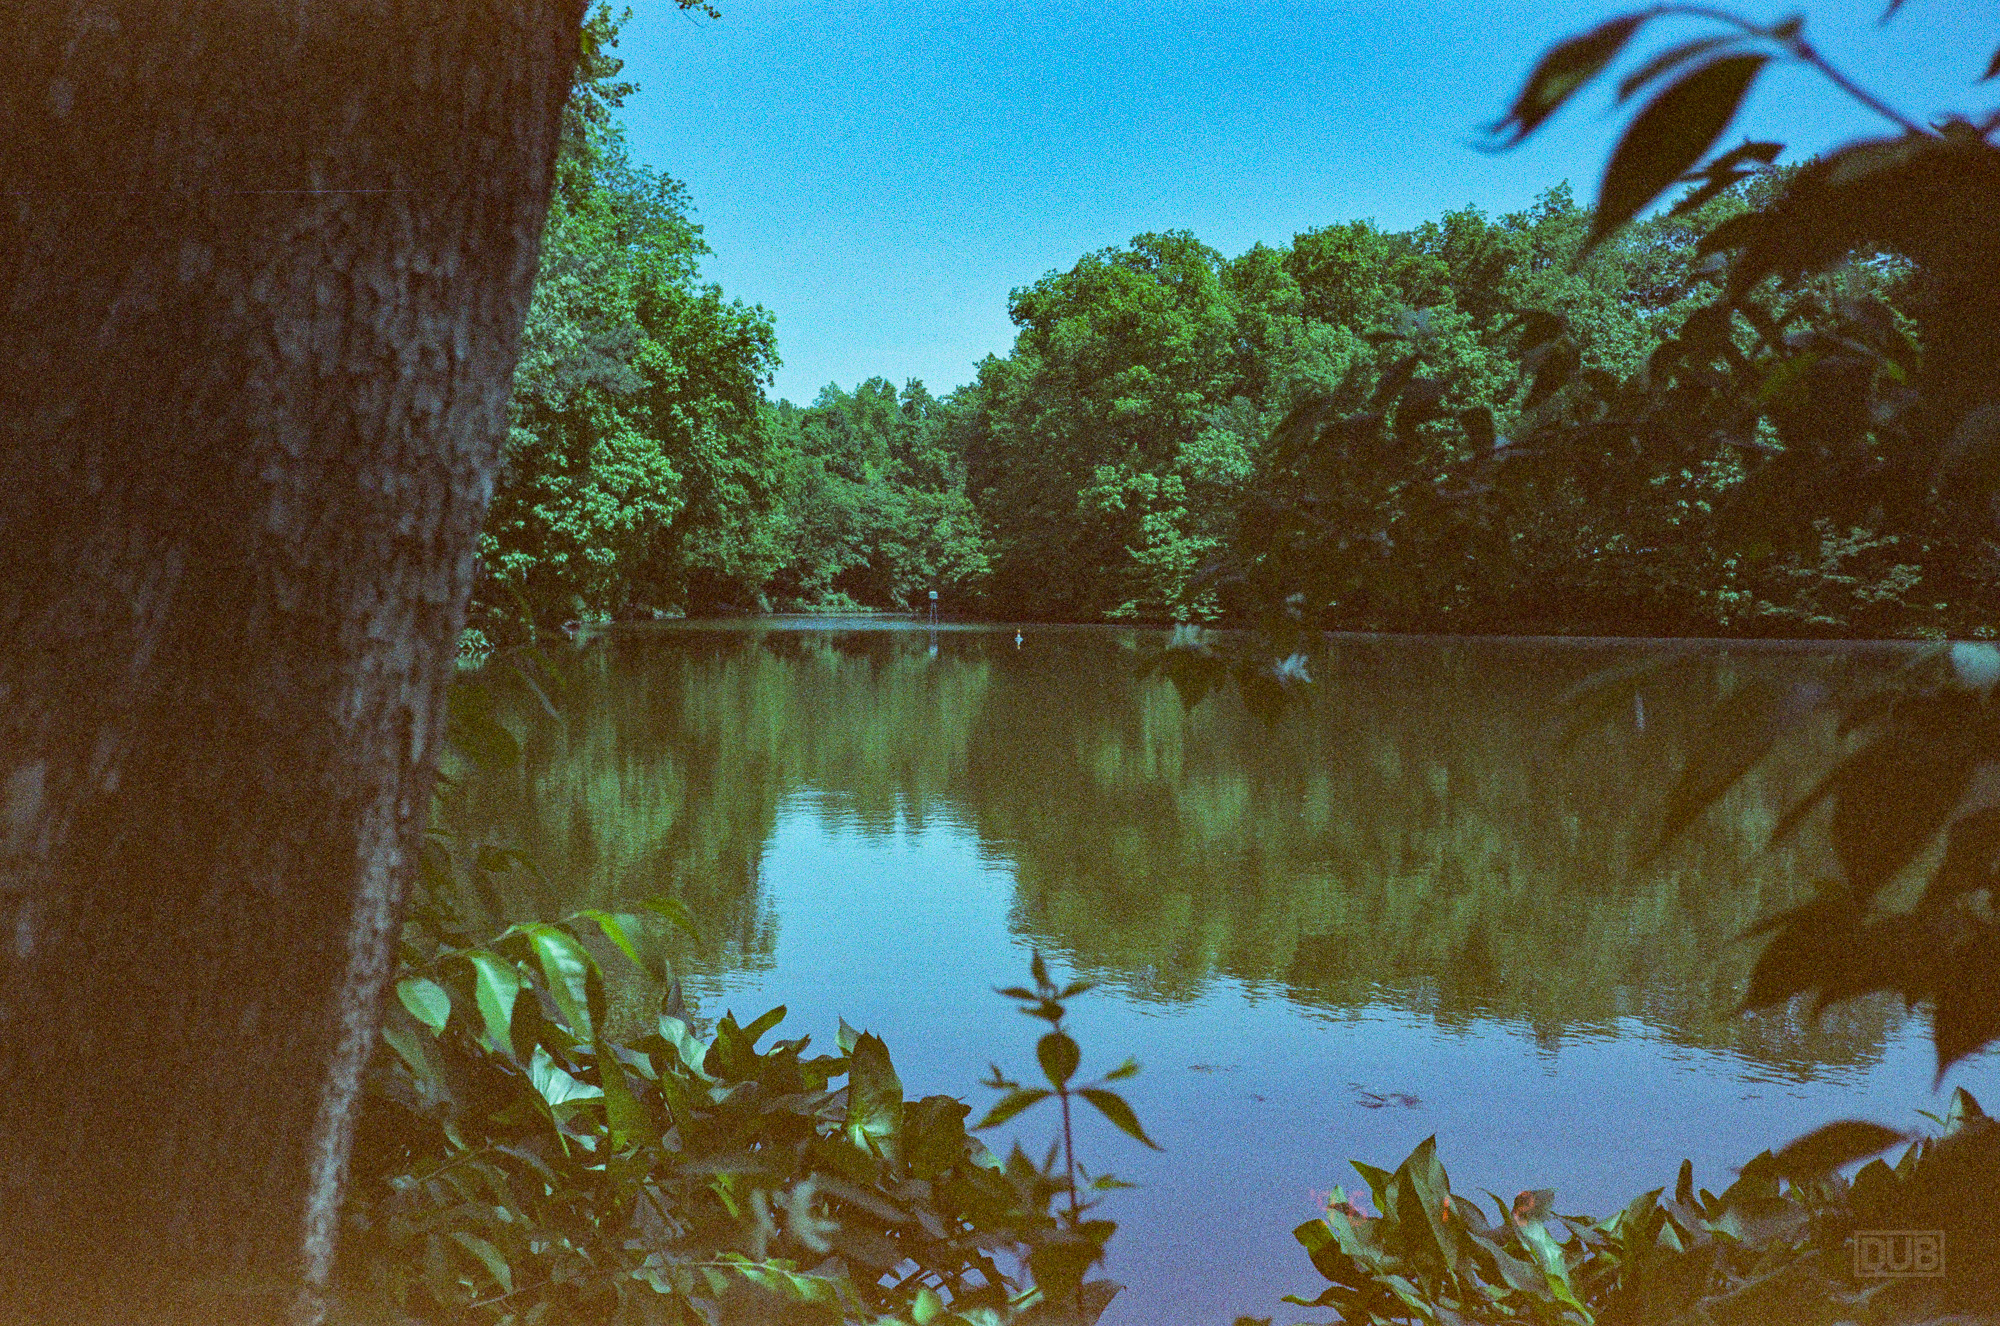 Olympus Stylus Epic DLX point and shoot camera and 3M expired 35mm film from Target